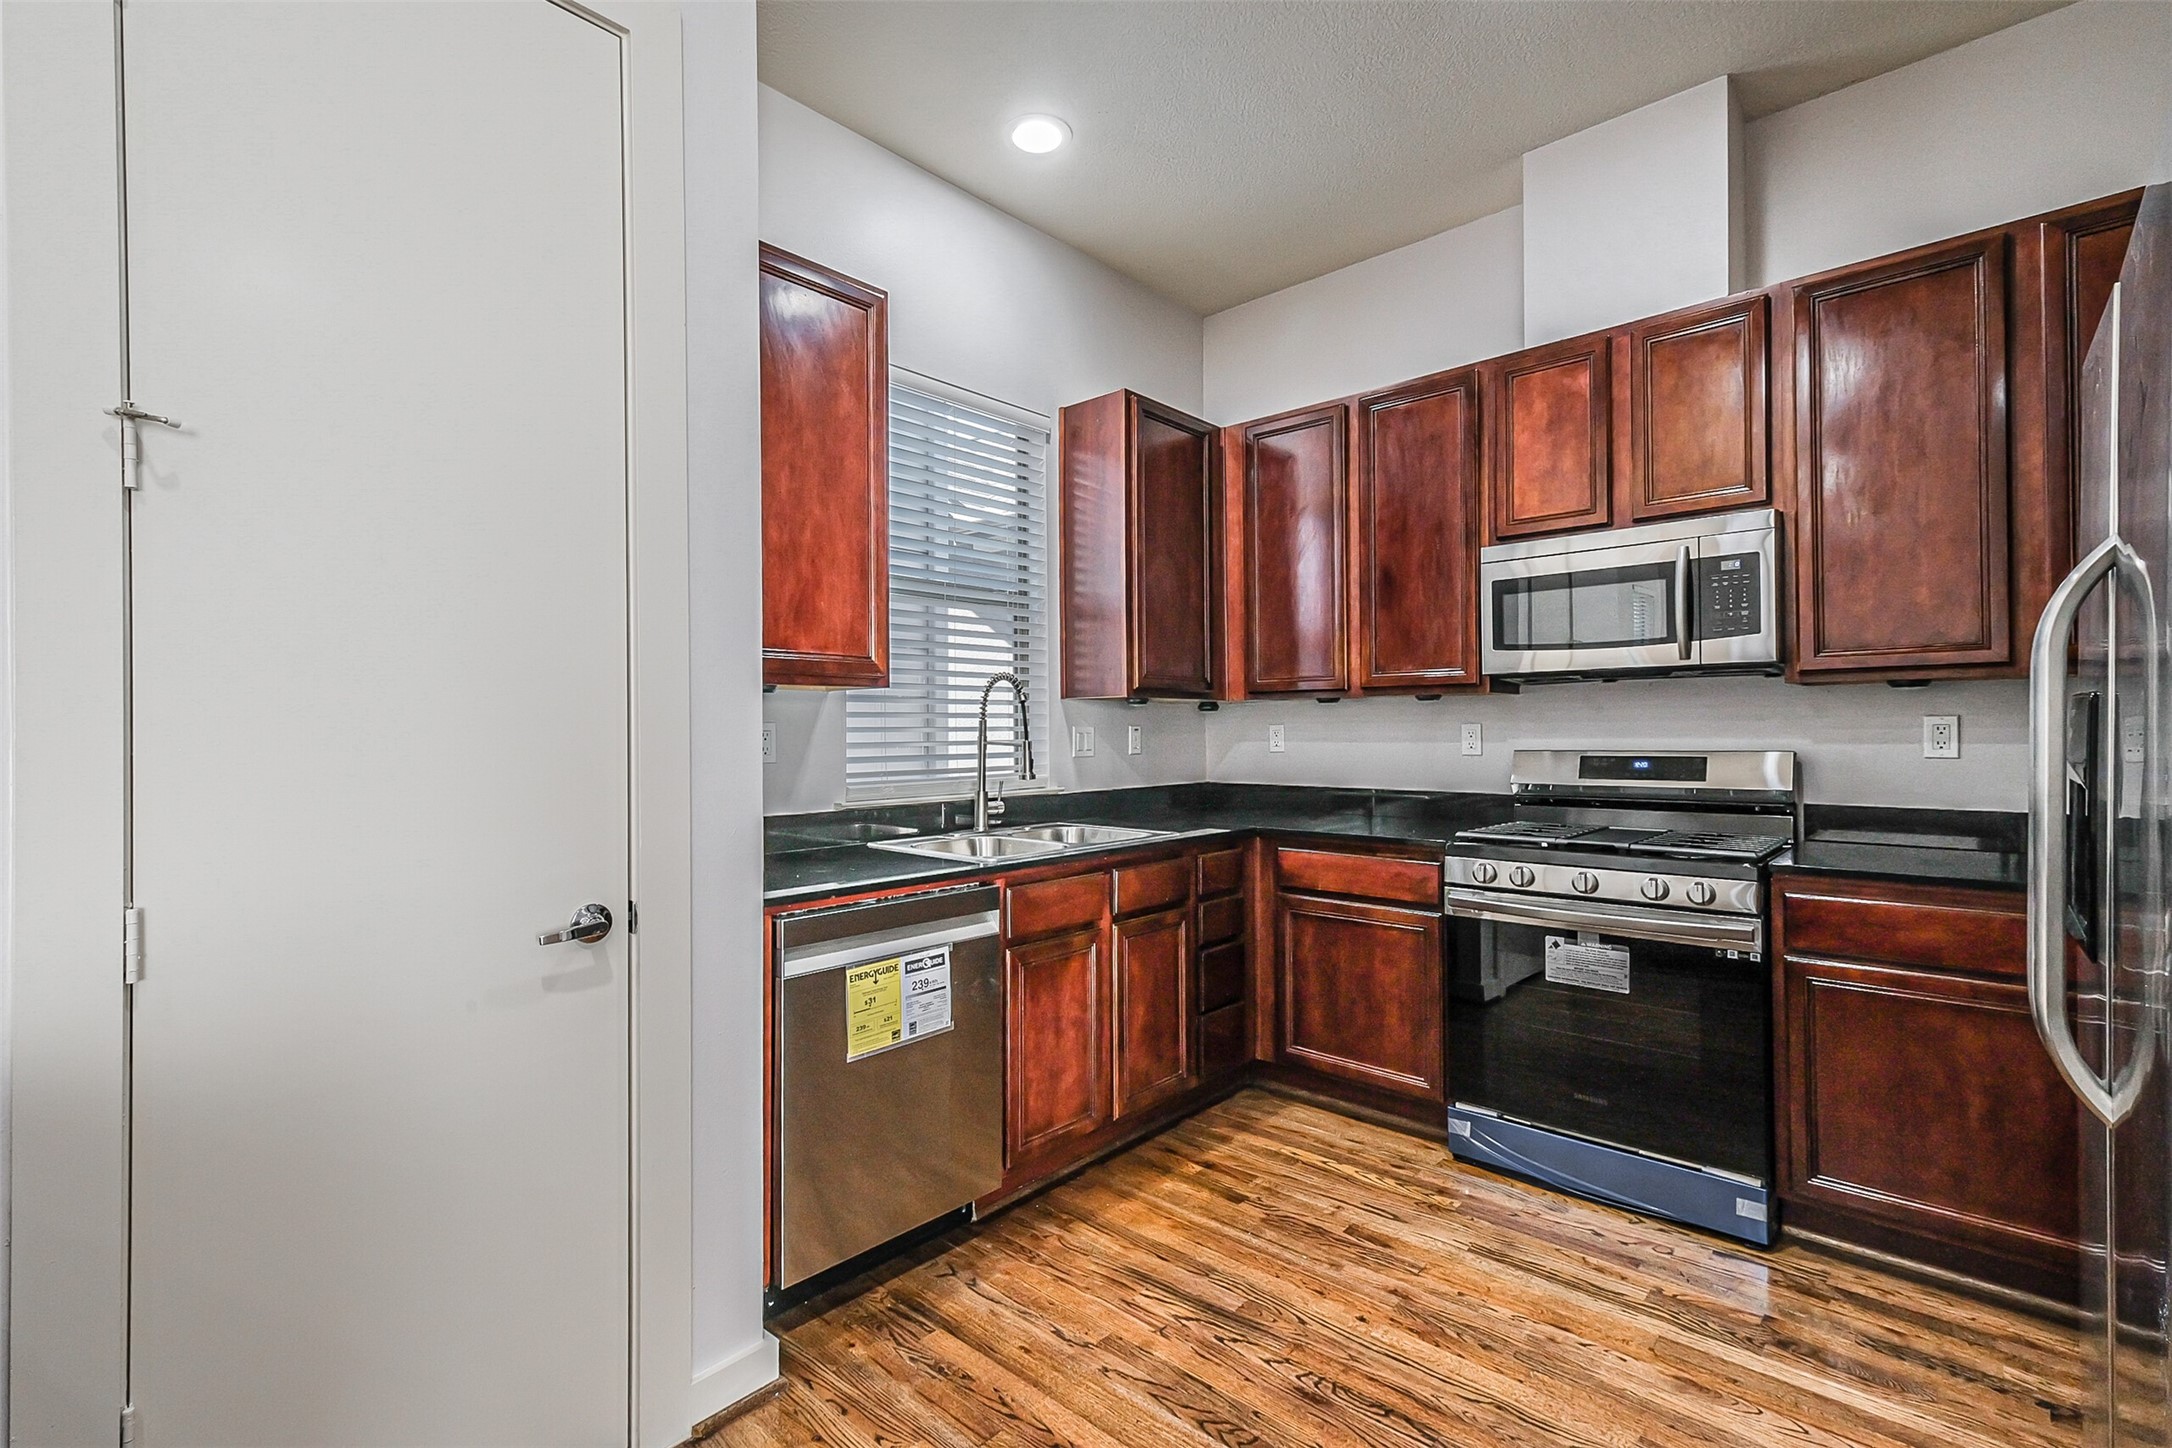 Beautiful cabinets with red oak stain - If you have additional questions regarding 4336 Center Street  in Houston or would like to tour the property with us call 800-660-1022 and reference MLS# 24798932.